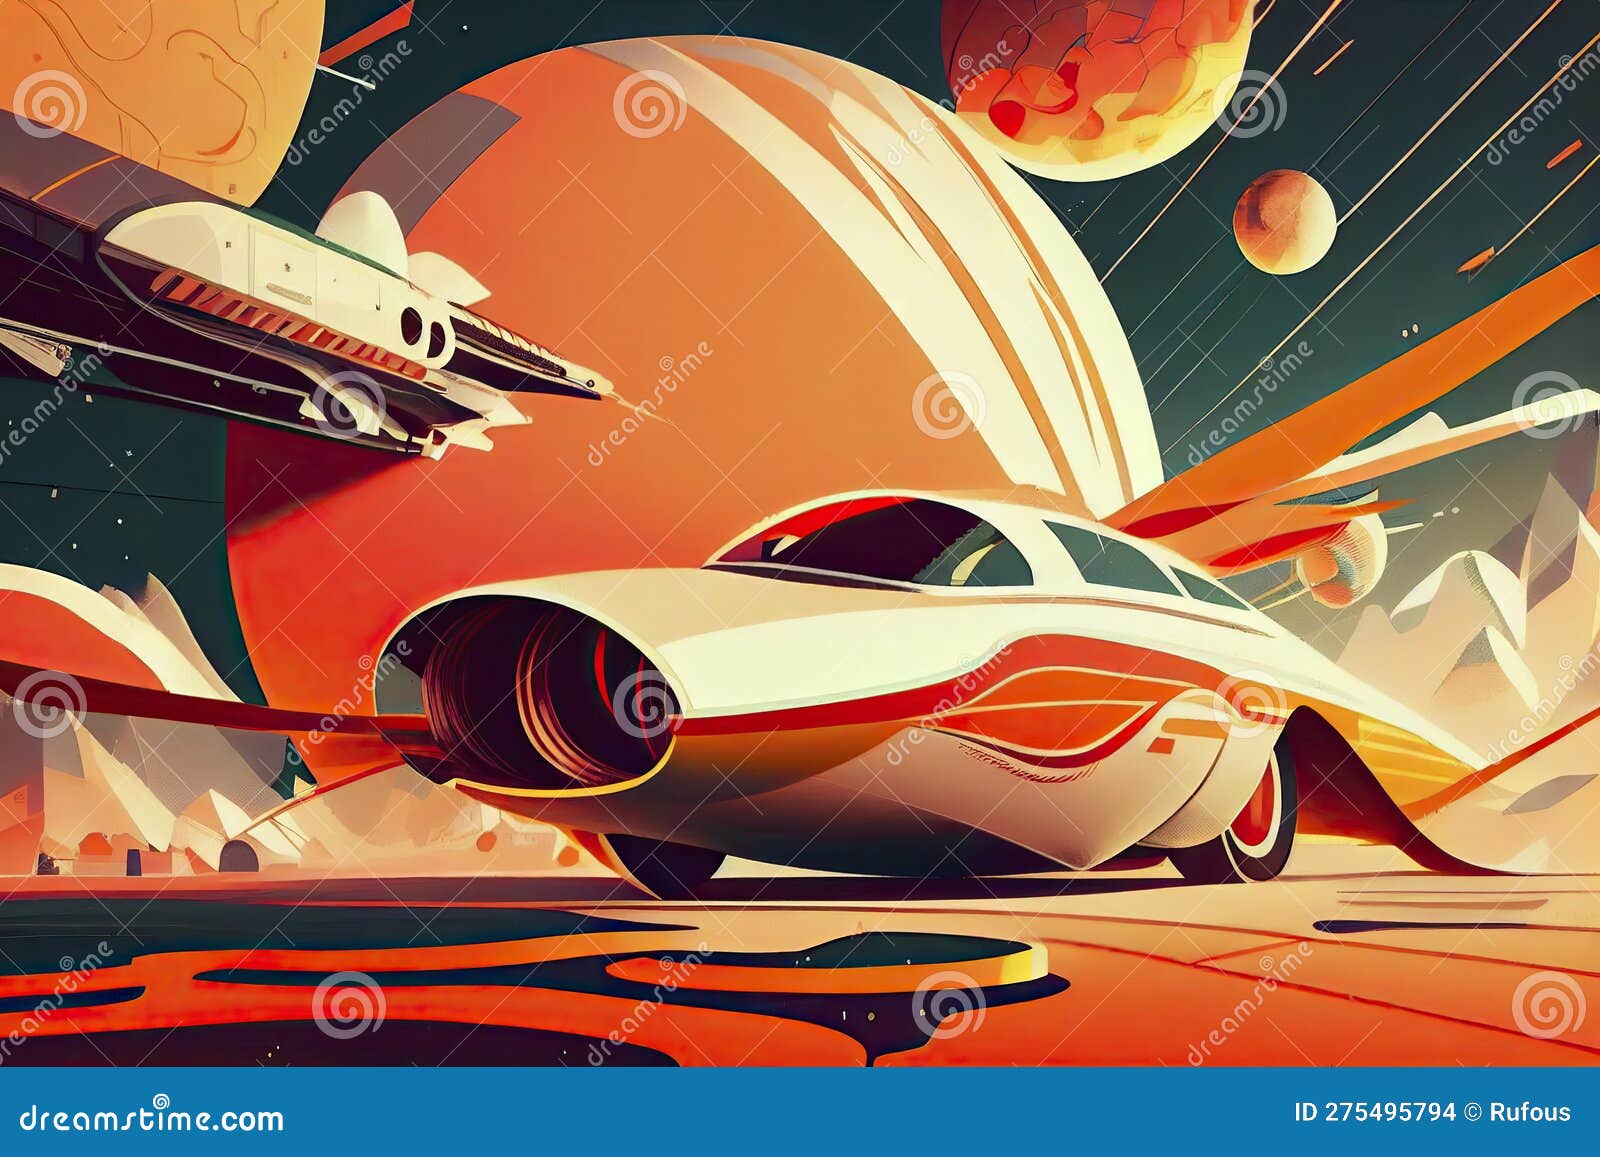 1960s-1970s Retro Style Space Illustrations. Psychedelic Style